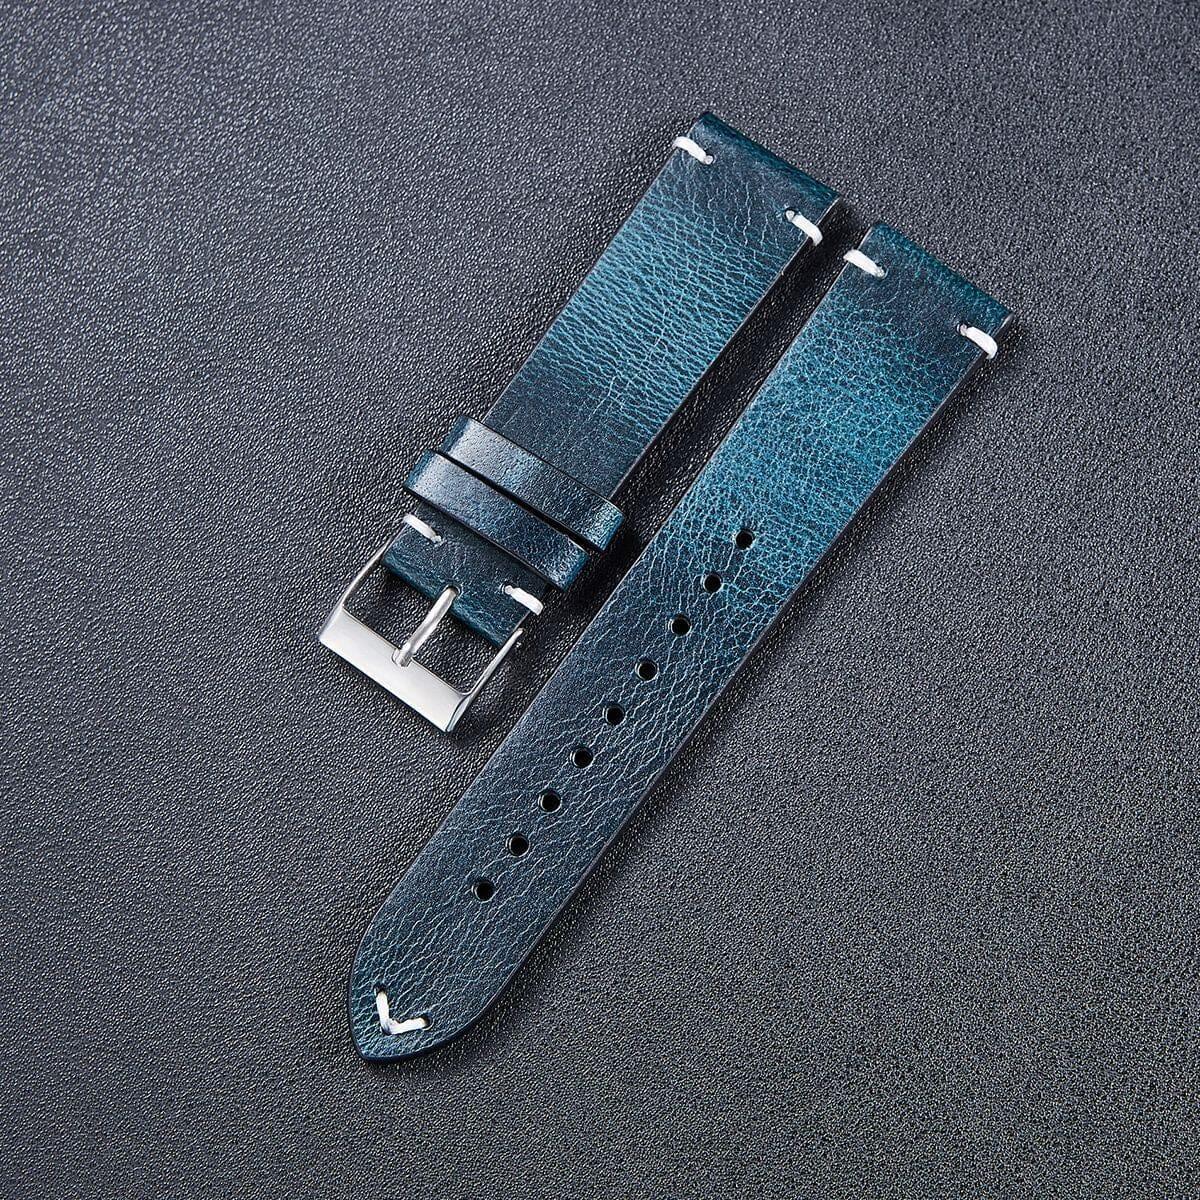 Vintage Oiled Leather Watch Straps Compatible with the Diesel Fadelite